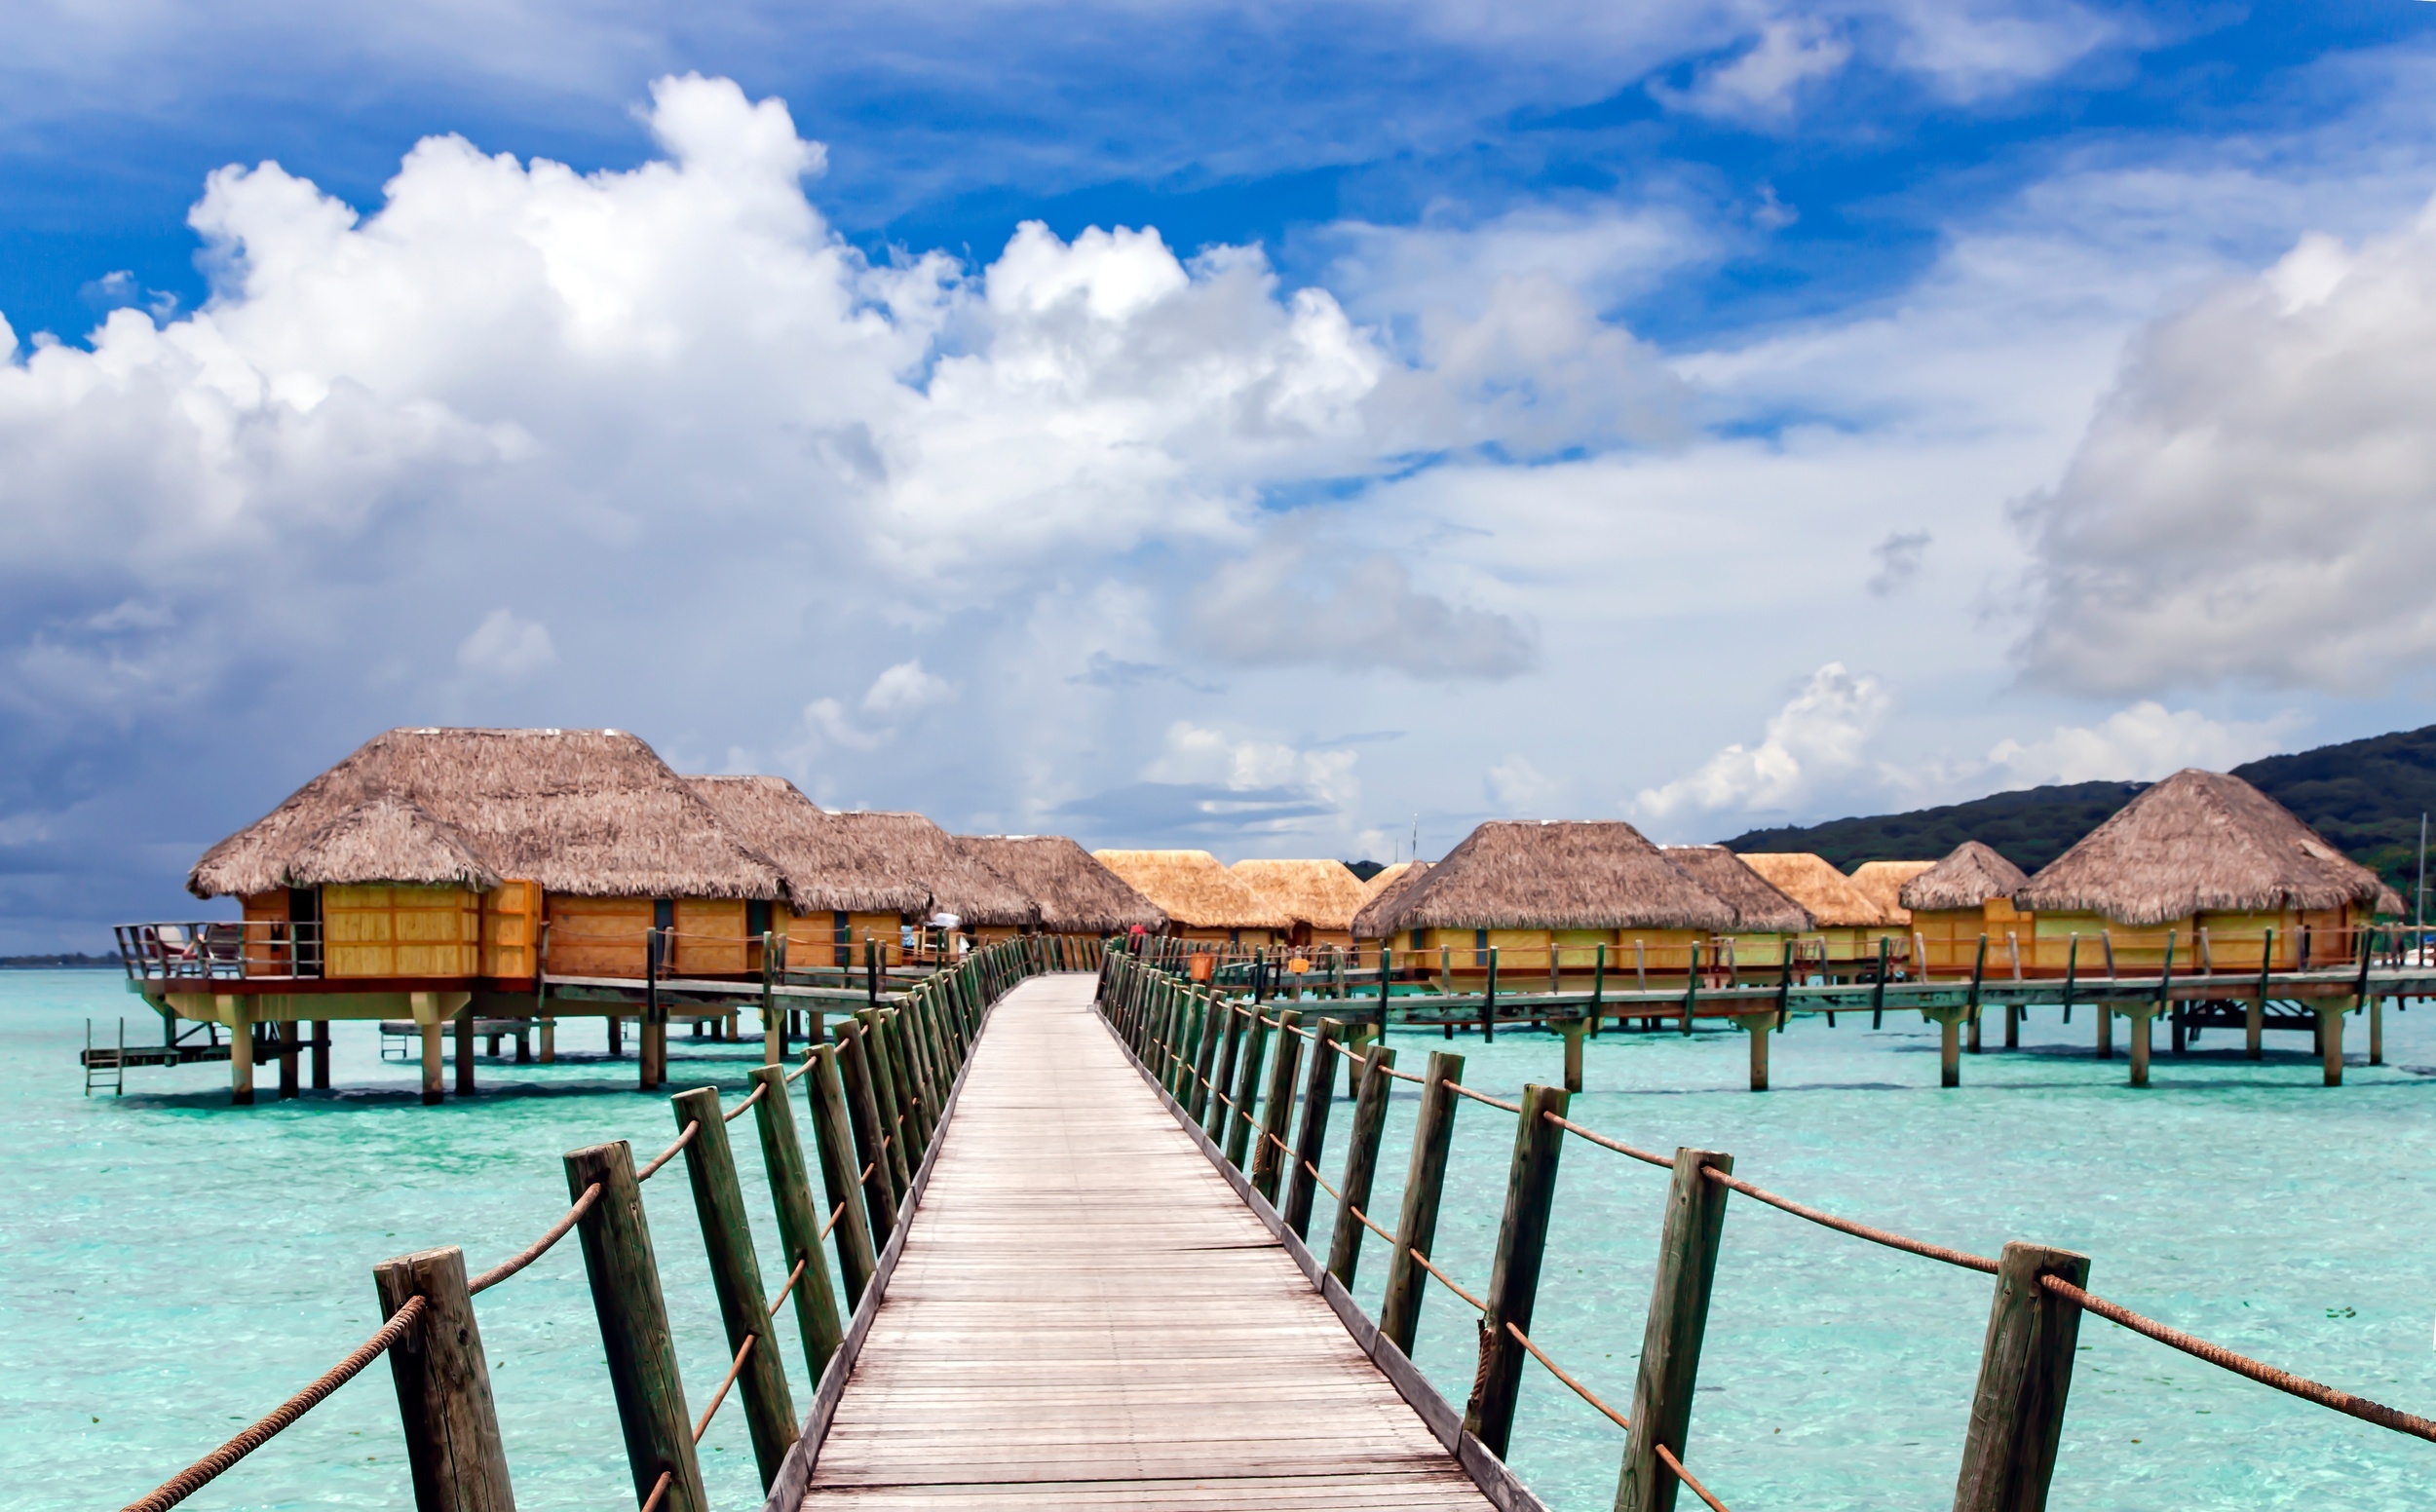 <p>Bora Bora is synonymous with a dreamy holiday, and for good reason. Who wouldn’t want to relax in an overwater bungalow and swim in the electric blue ocean while snow piles up back home?</p><p>You may also like: <a href='https://www.yardbarker.com/lifestyle/articles/feeling_like_chicken_tonight_20_slow_cooker_chicken_recipes_022724/s1__37875139'>Feeling like chicken tonight? 20 slow cooker chicken recipes</a></p>